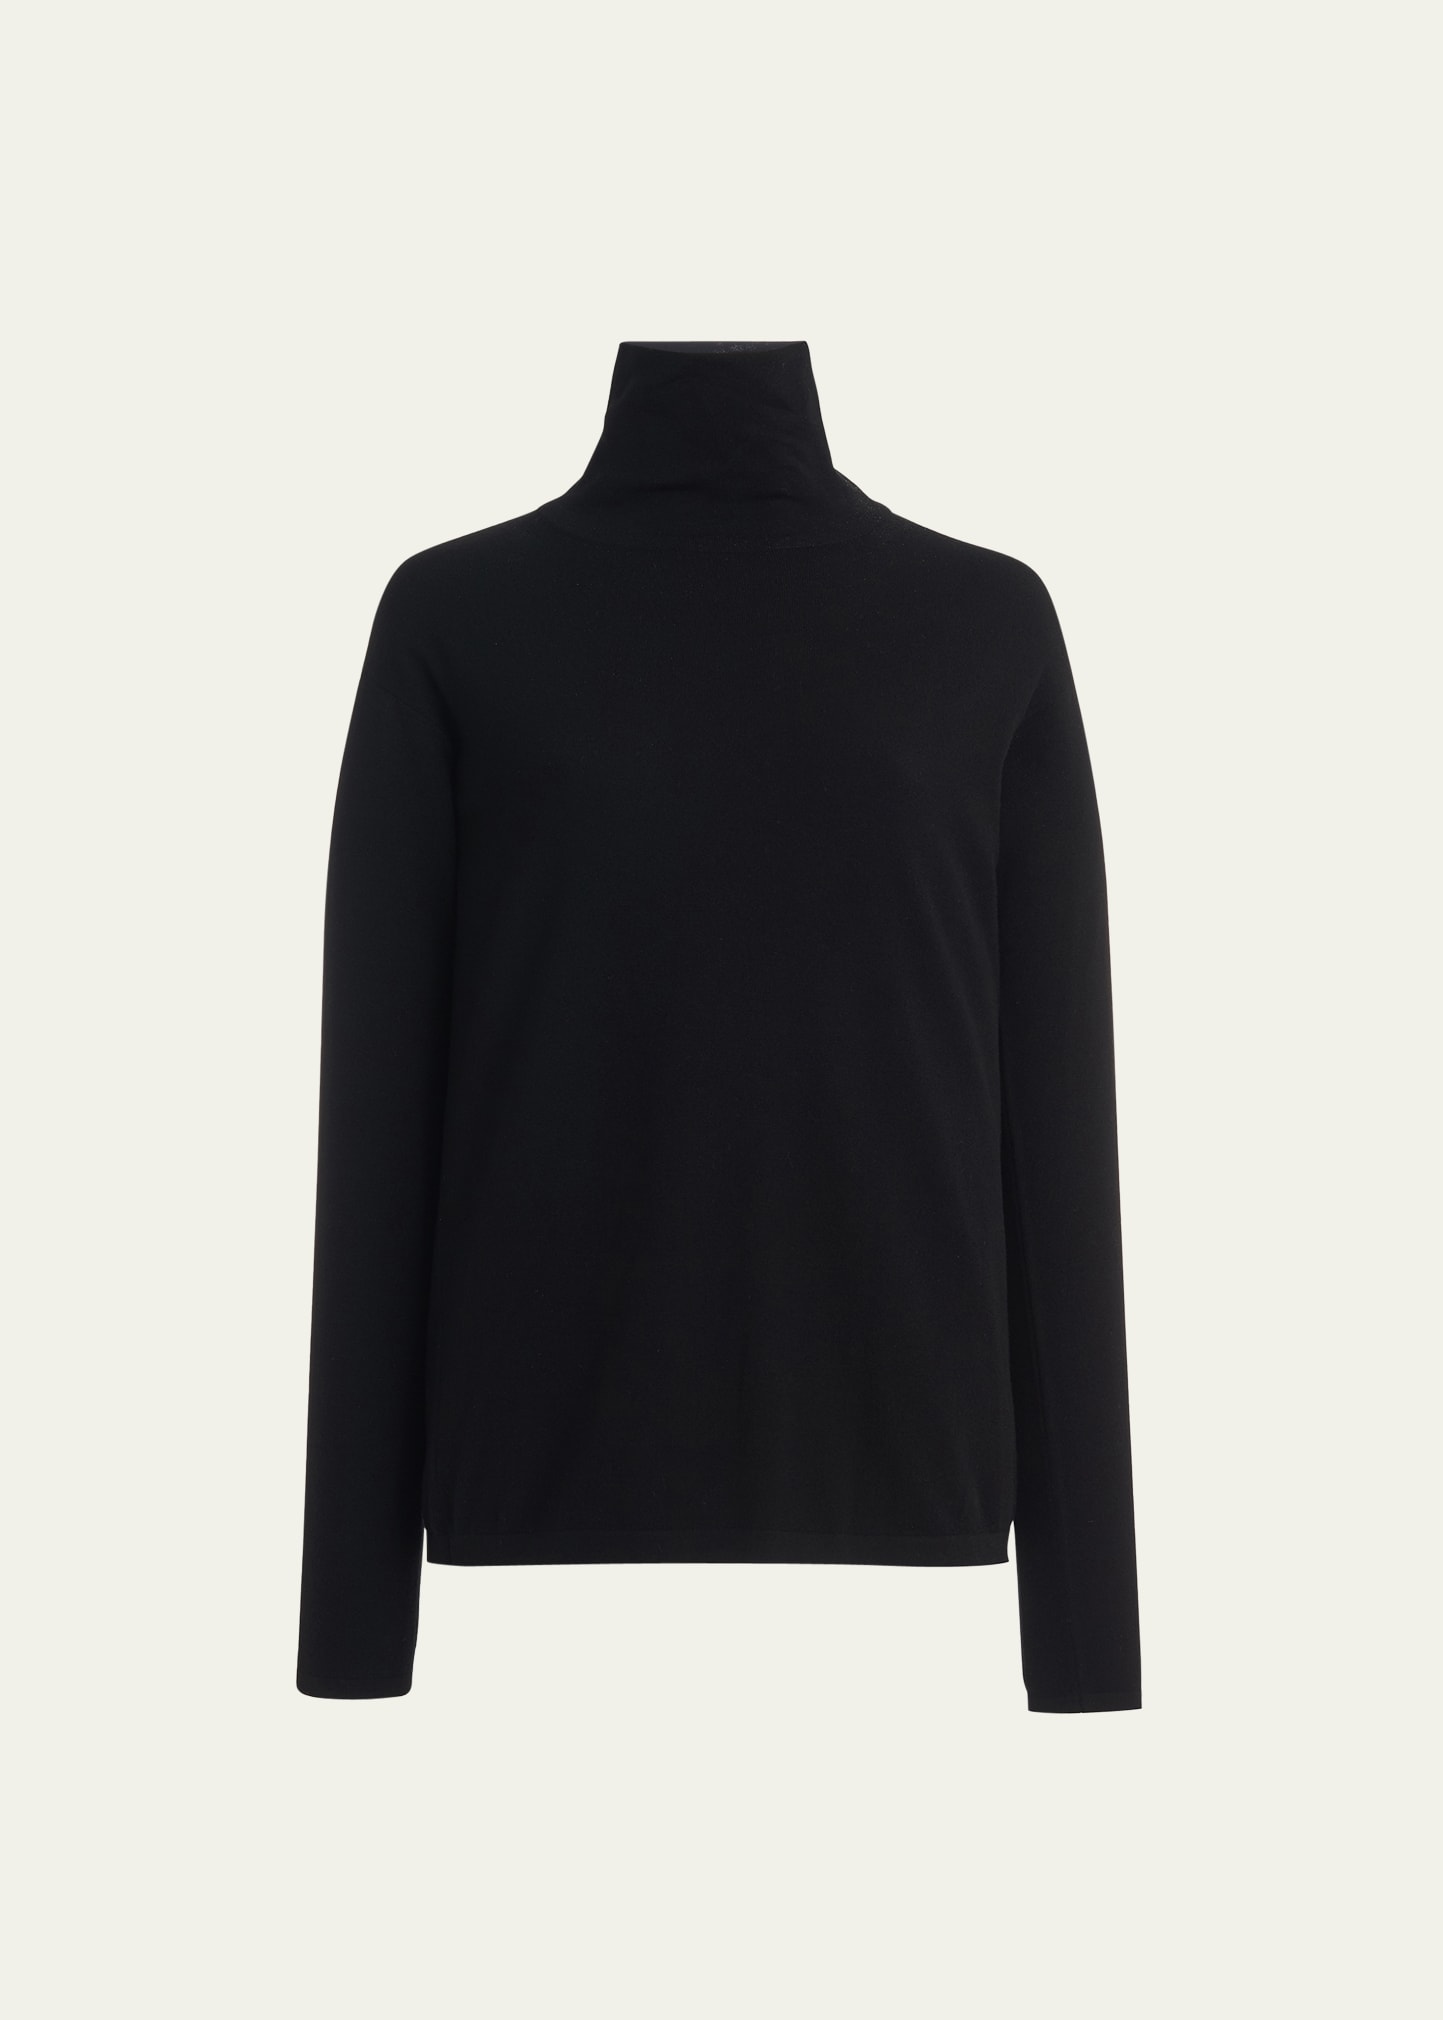 Another Tomorrow Turtleneck Wool Sweater In Black